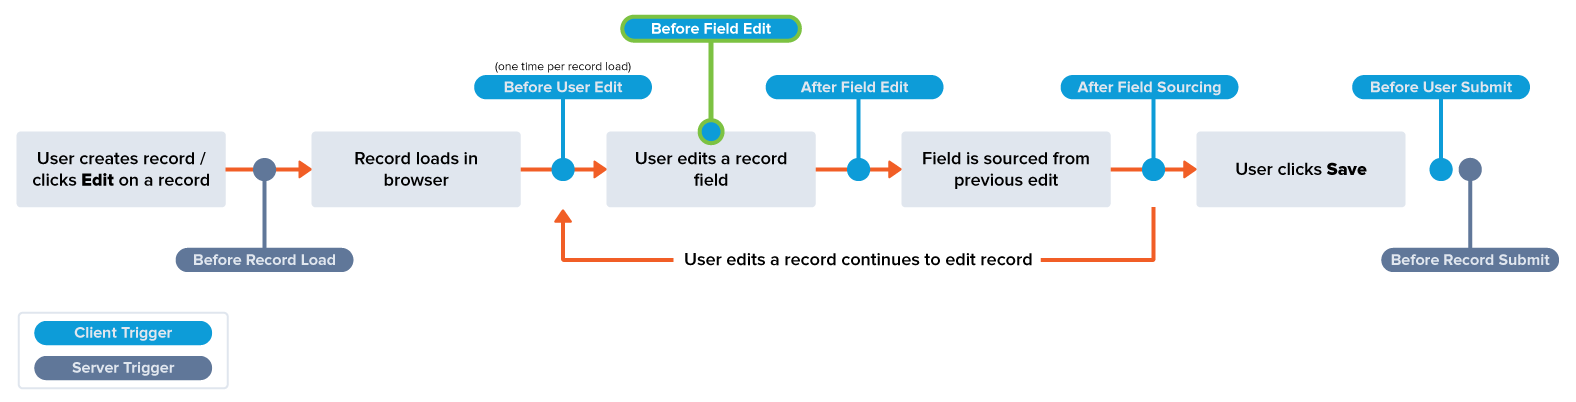 A diagram showing common record edit events and when the Before Field Edit trigger executes.